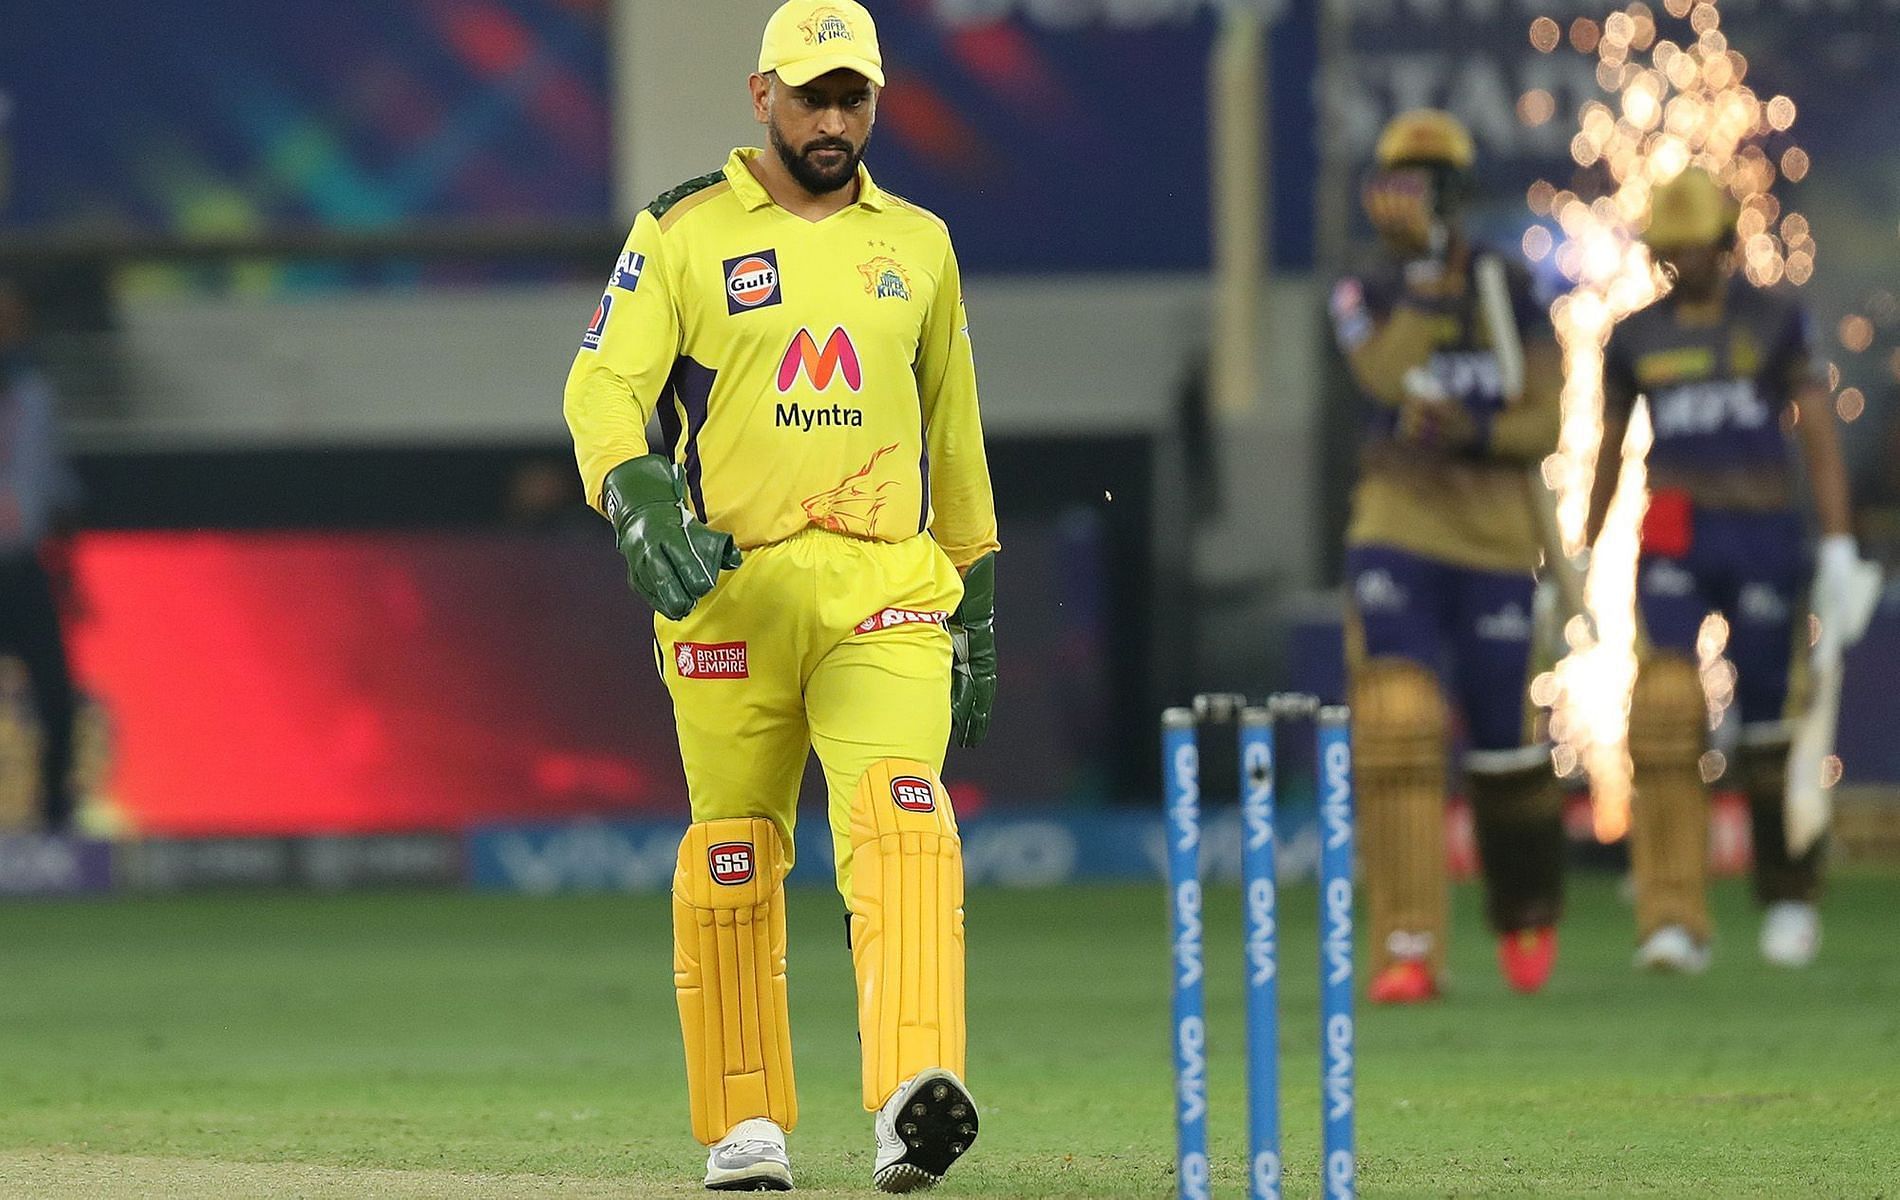 IPL 2021: MS Dhoni is one of the most successful captains in the league.